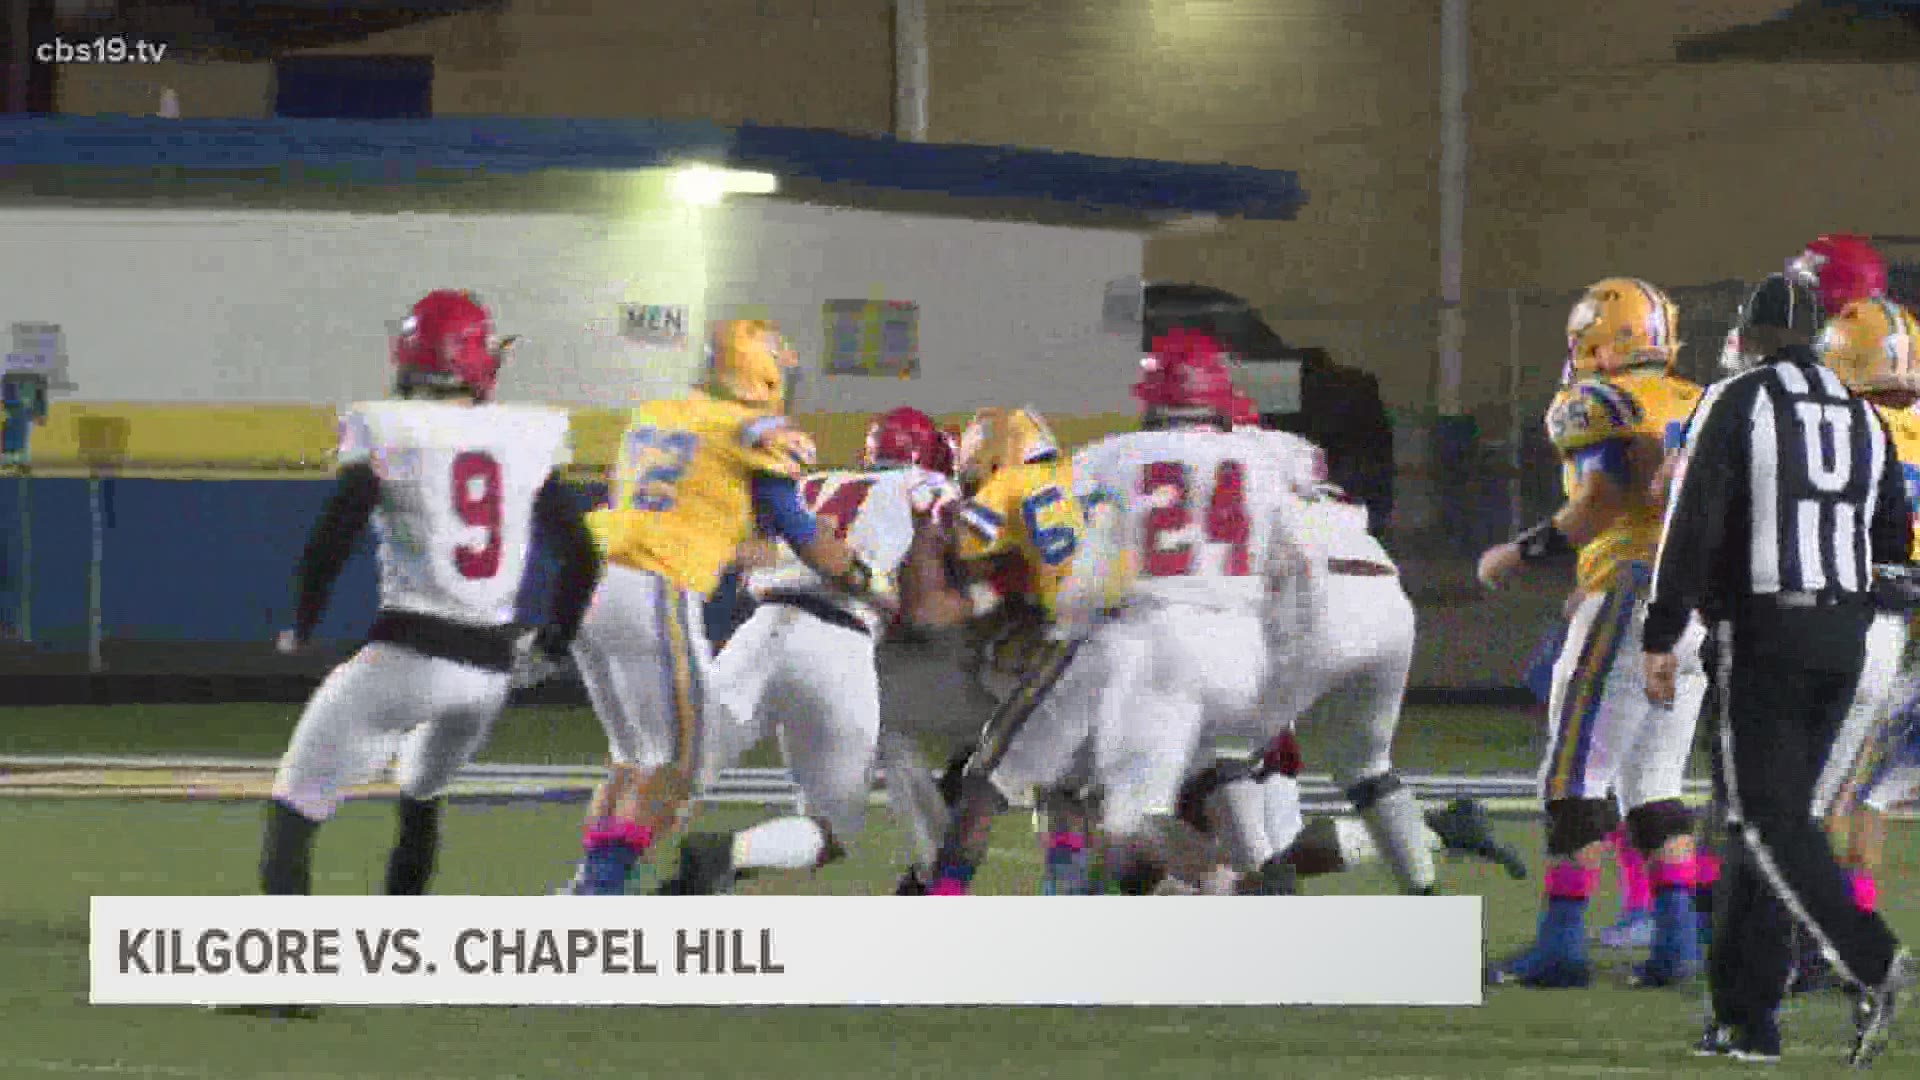 Kilgore came away with the win, defeating Chapel Hill 45-38.